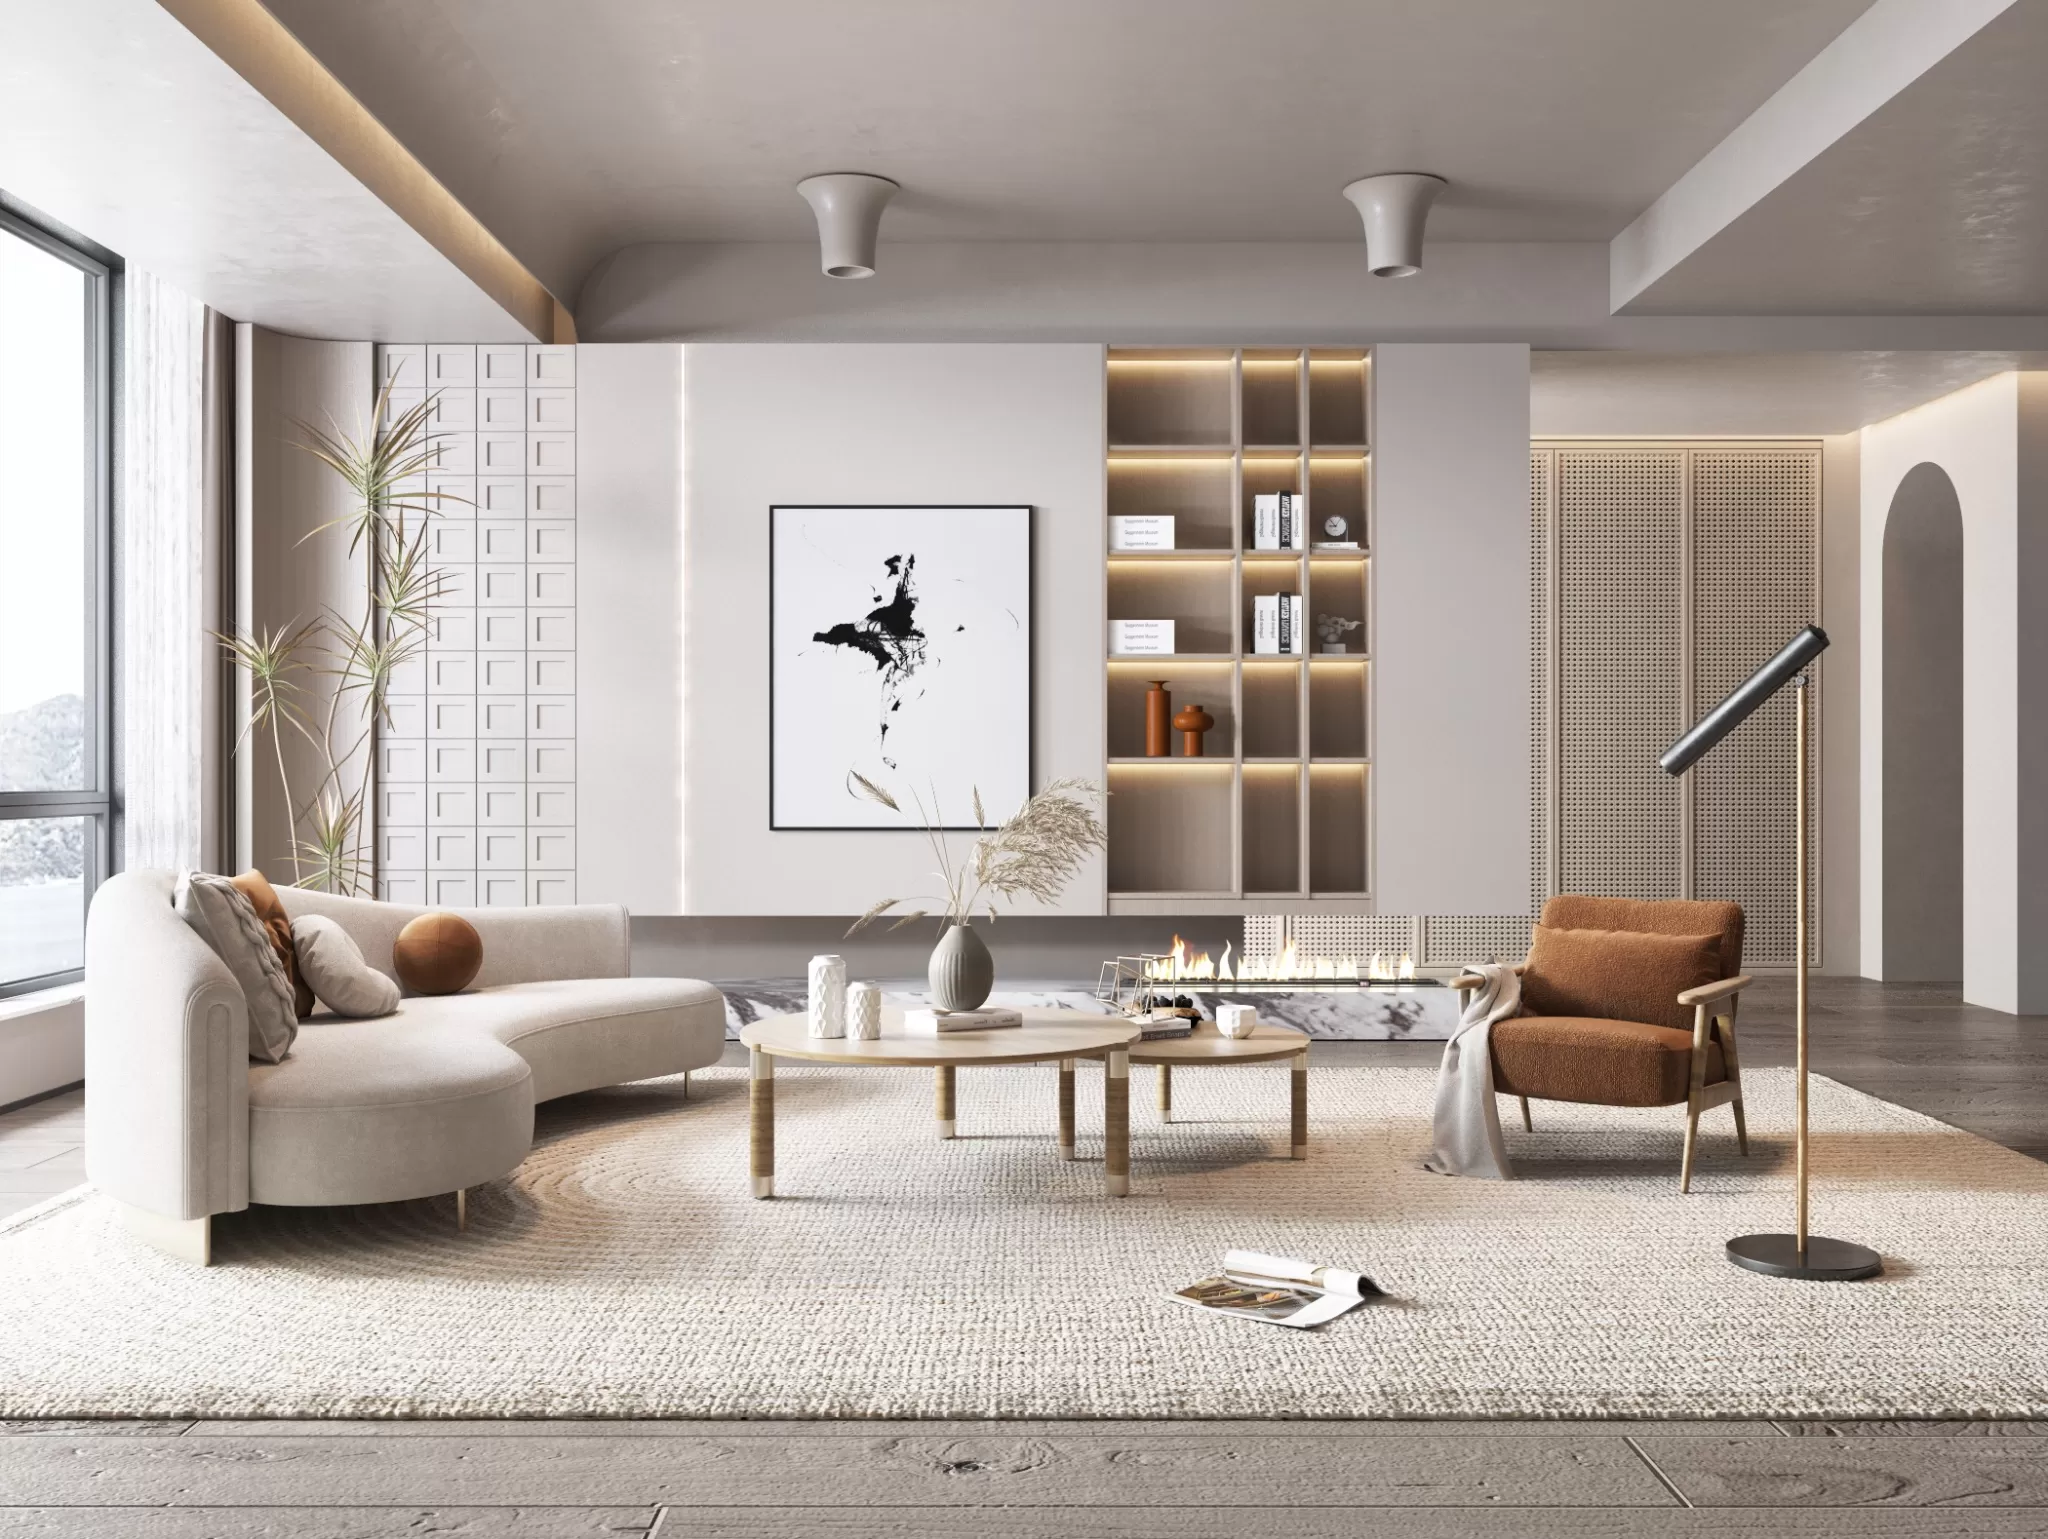 HOUSE SPACE 3D SCENES – LIVING ROOM – 0045